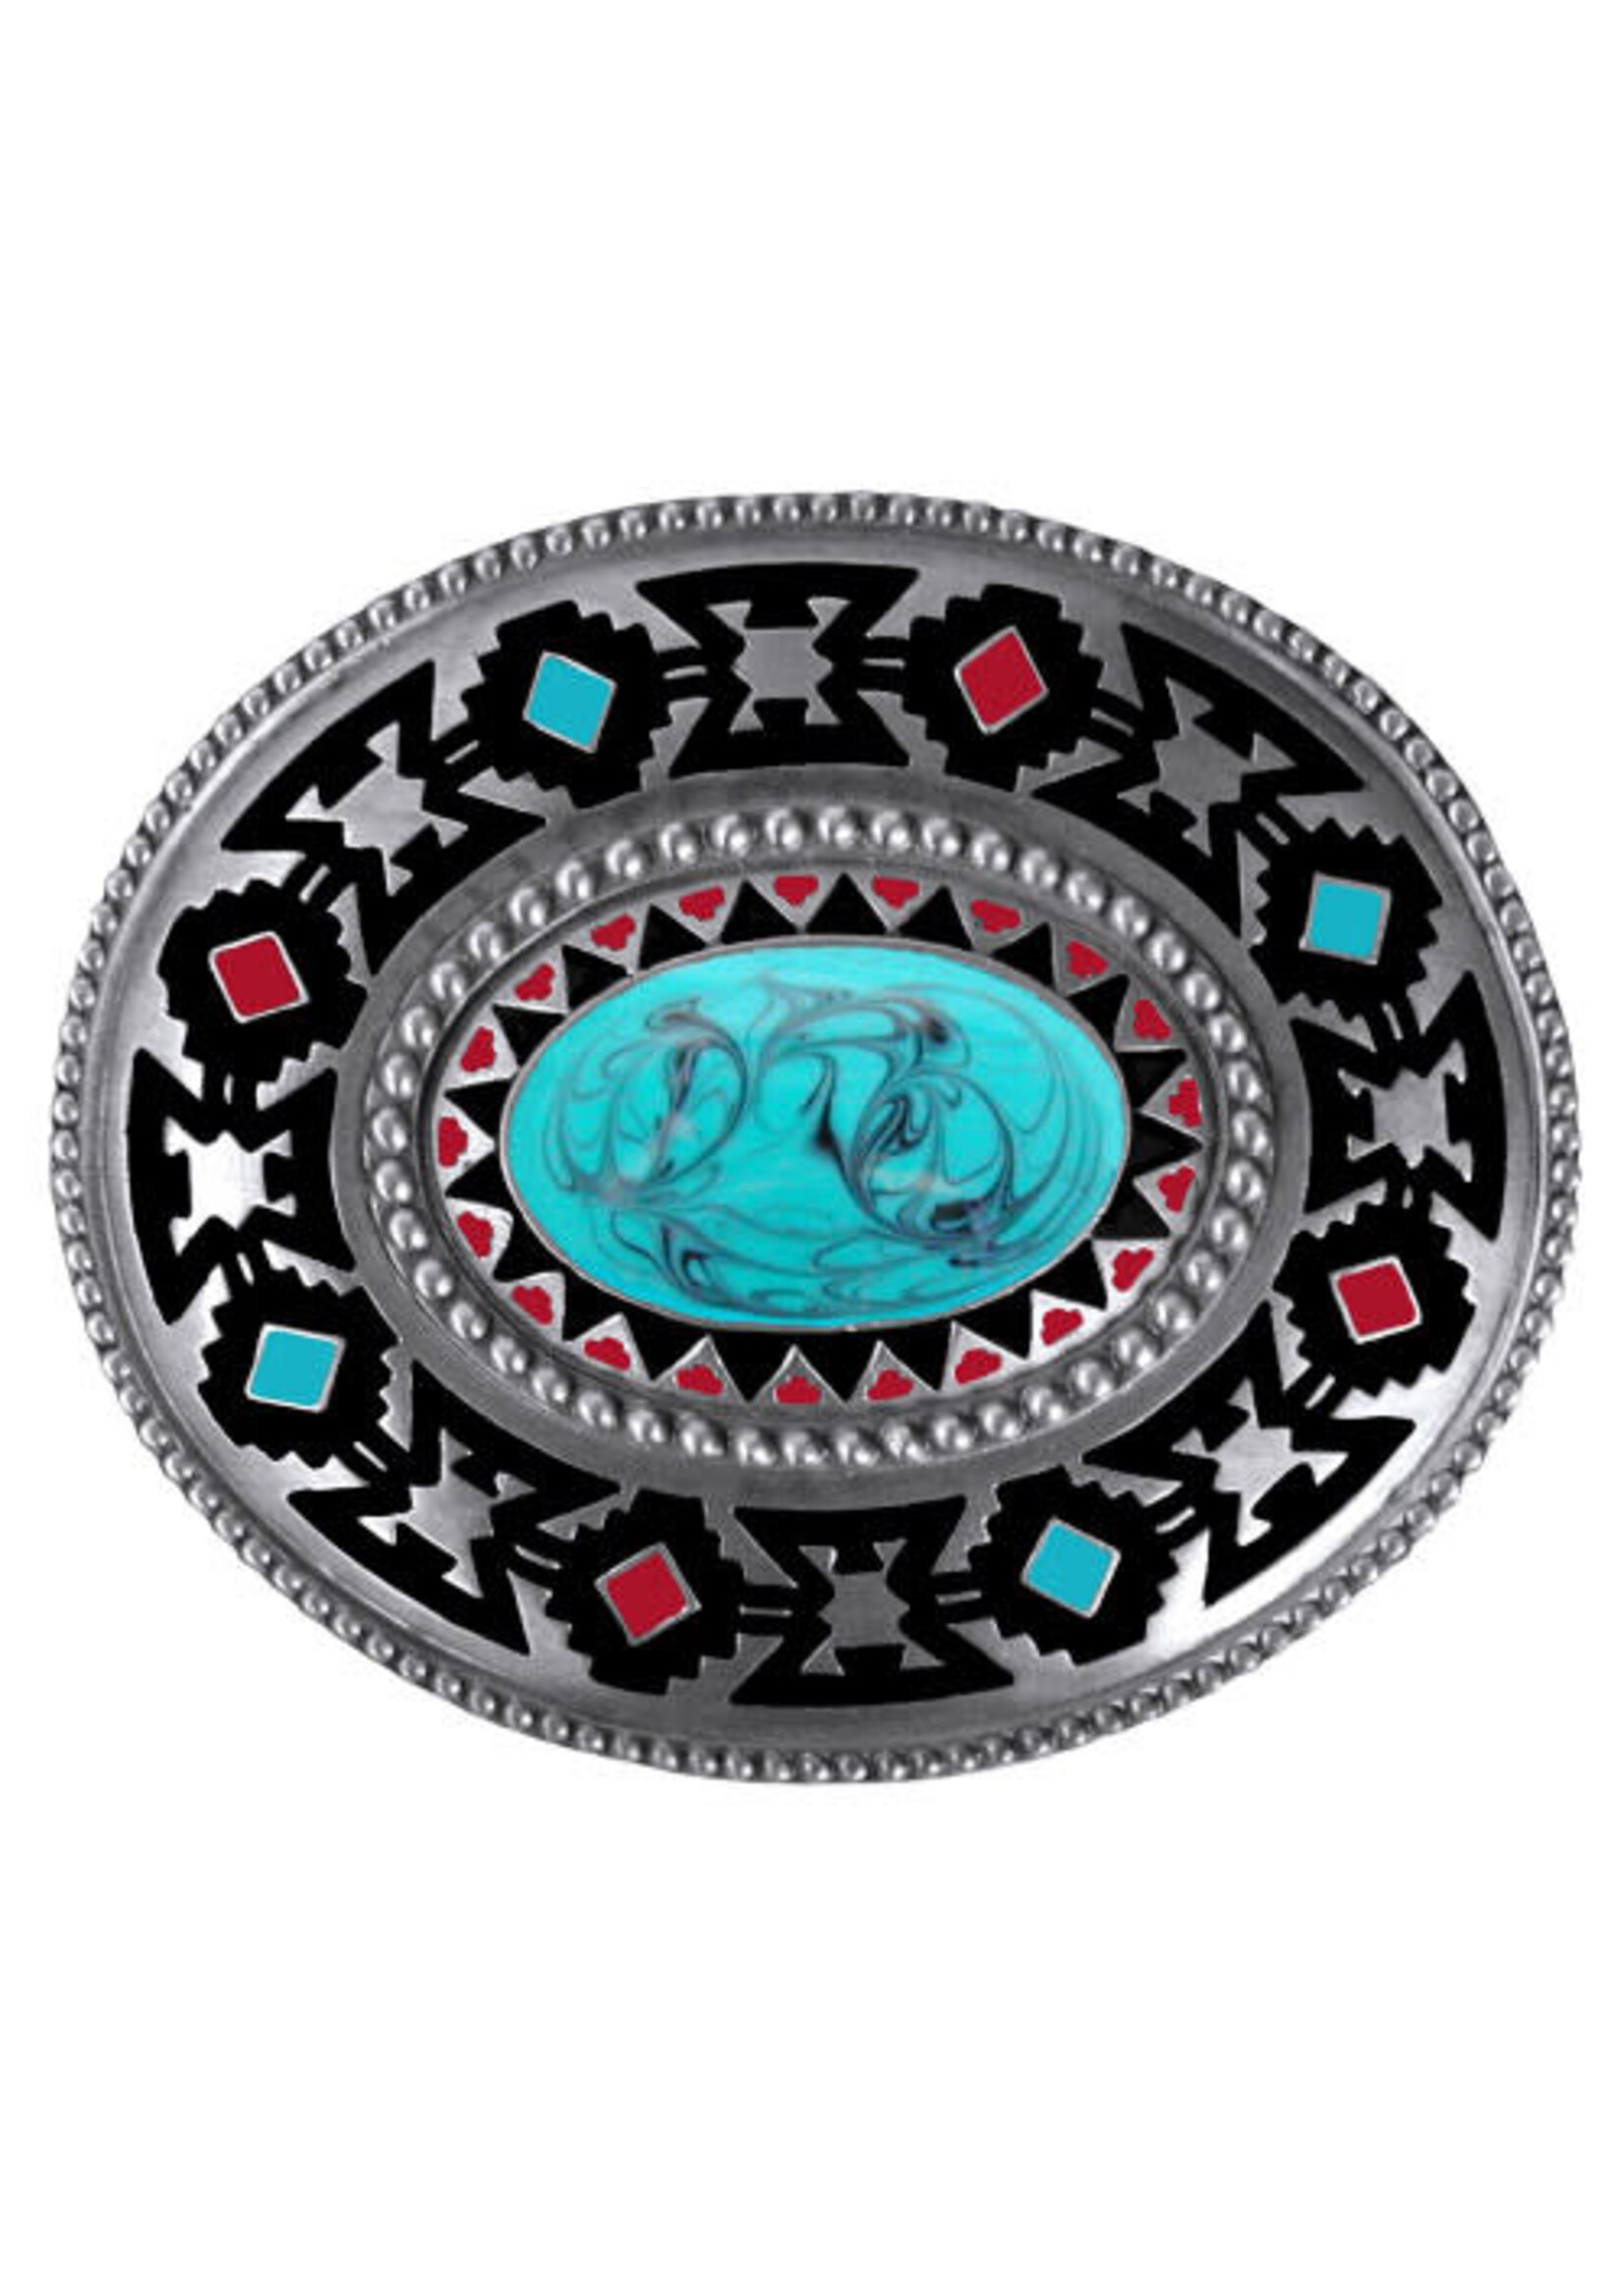 BU-015- E - Western Express Turquoise Red Black Buckle